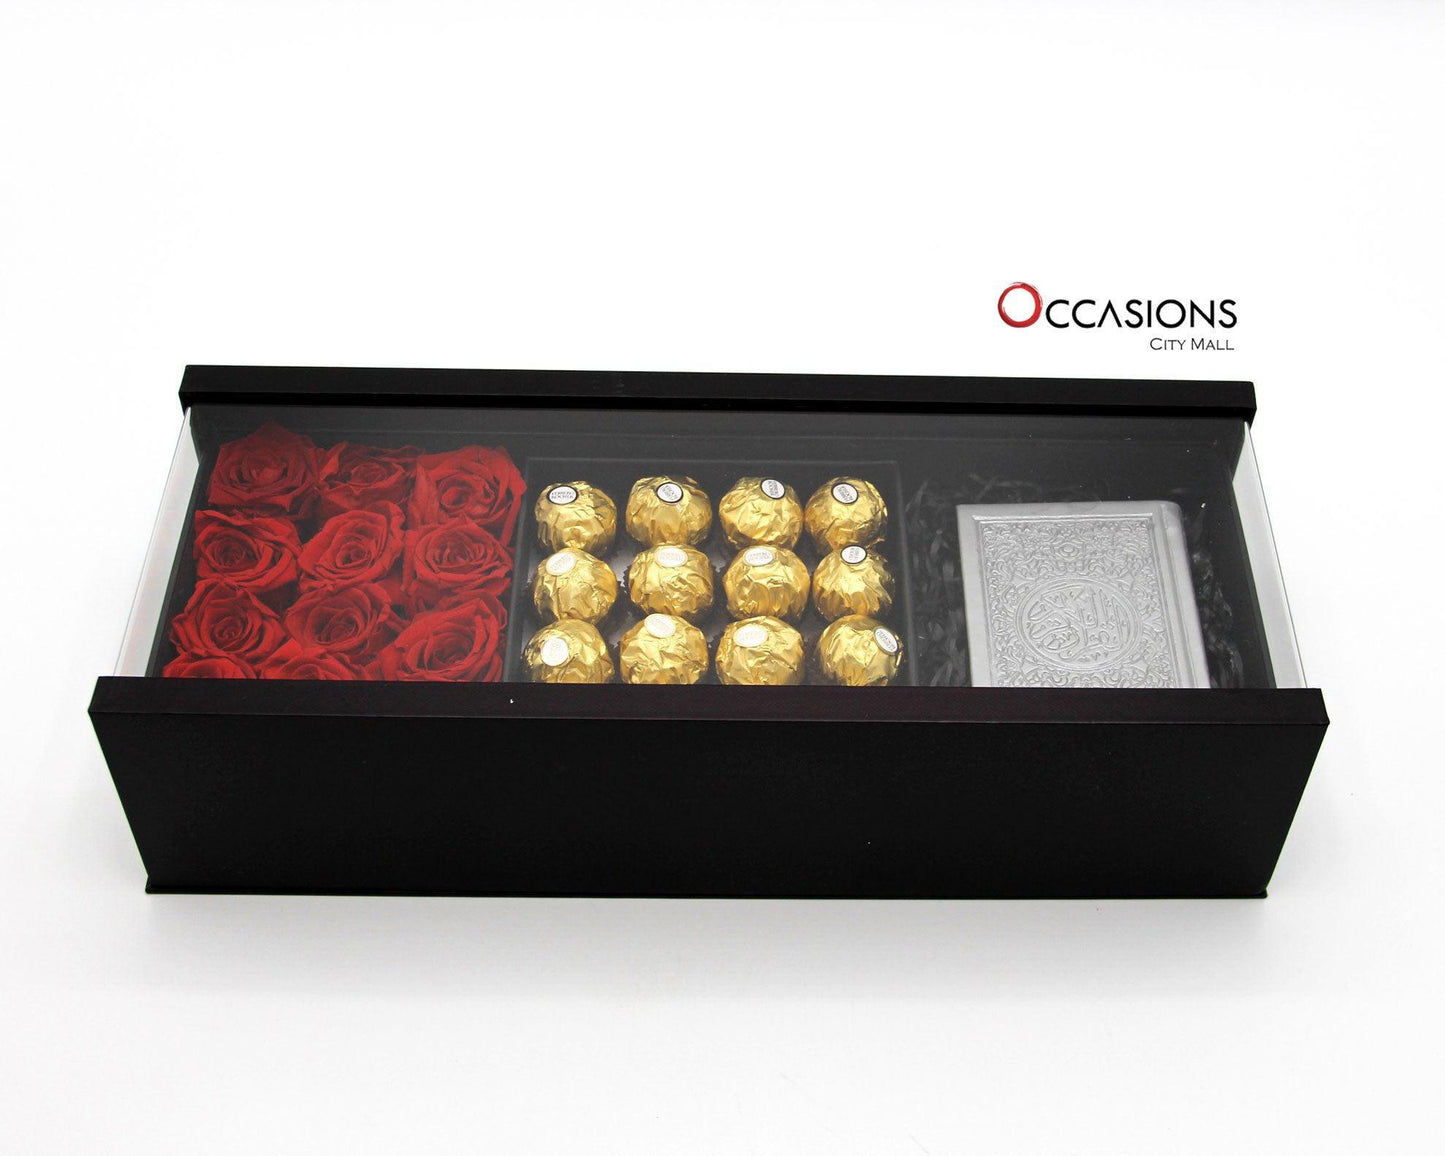 Silver Quran with Roses & Chocolate Package Flowerssend_delivery_Amman_Jordan